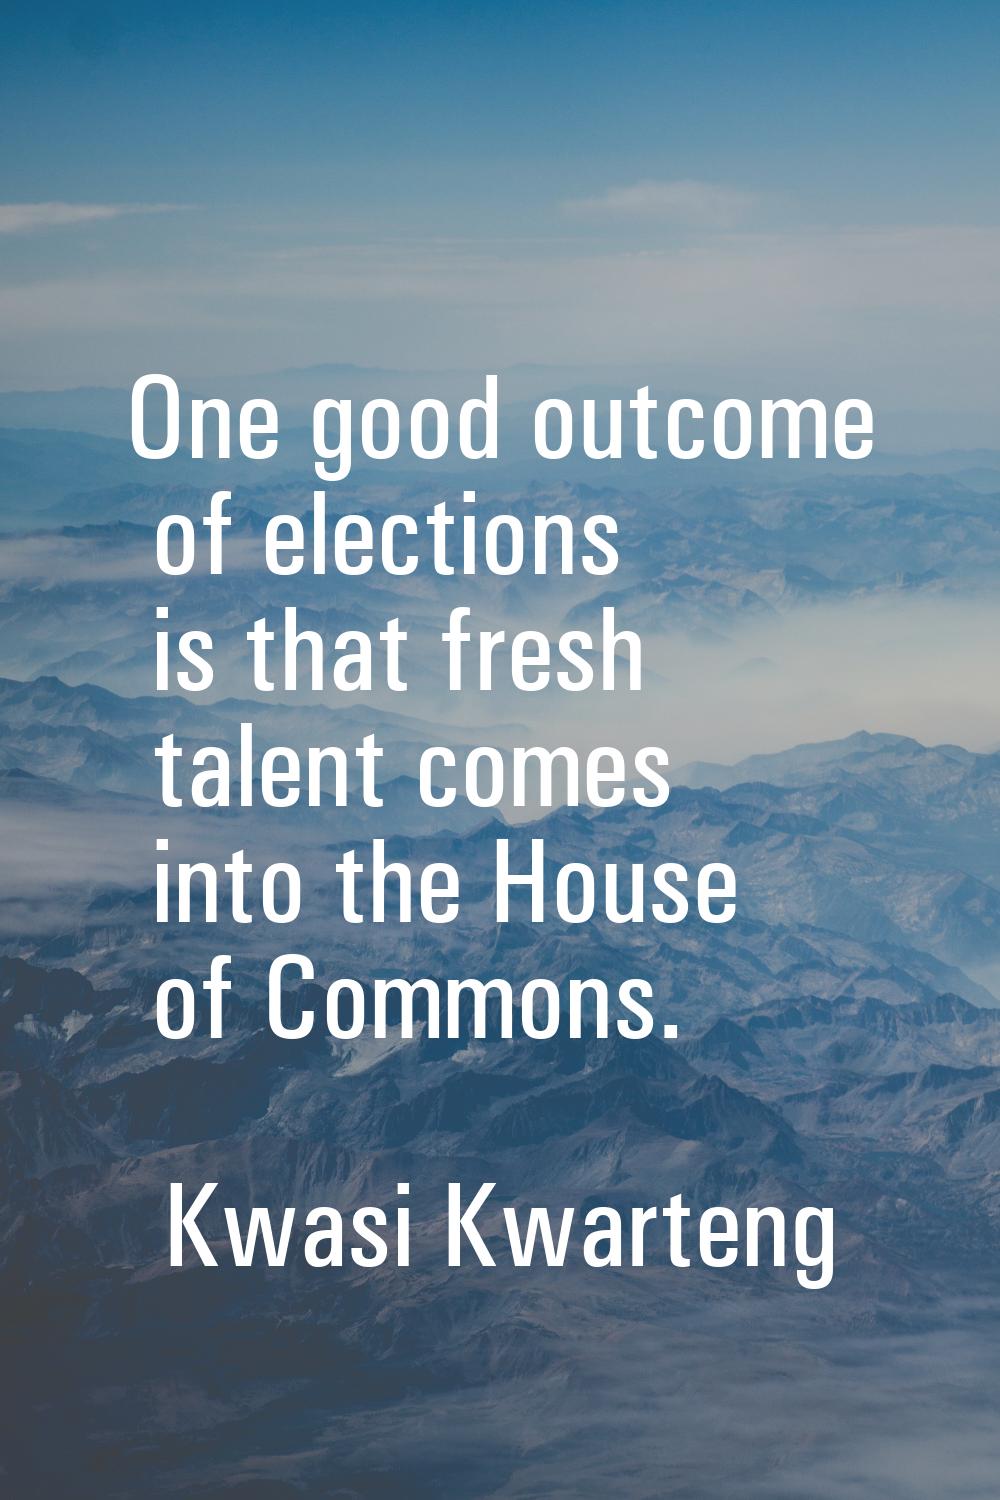 One good outcome of elections is that fresh talent comes into the House of Commons.